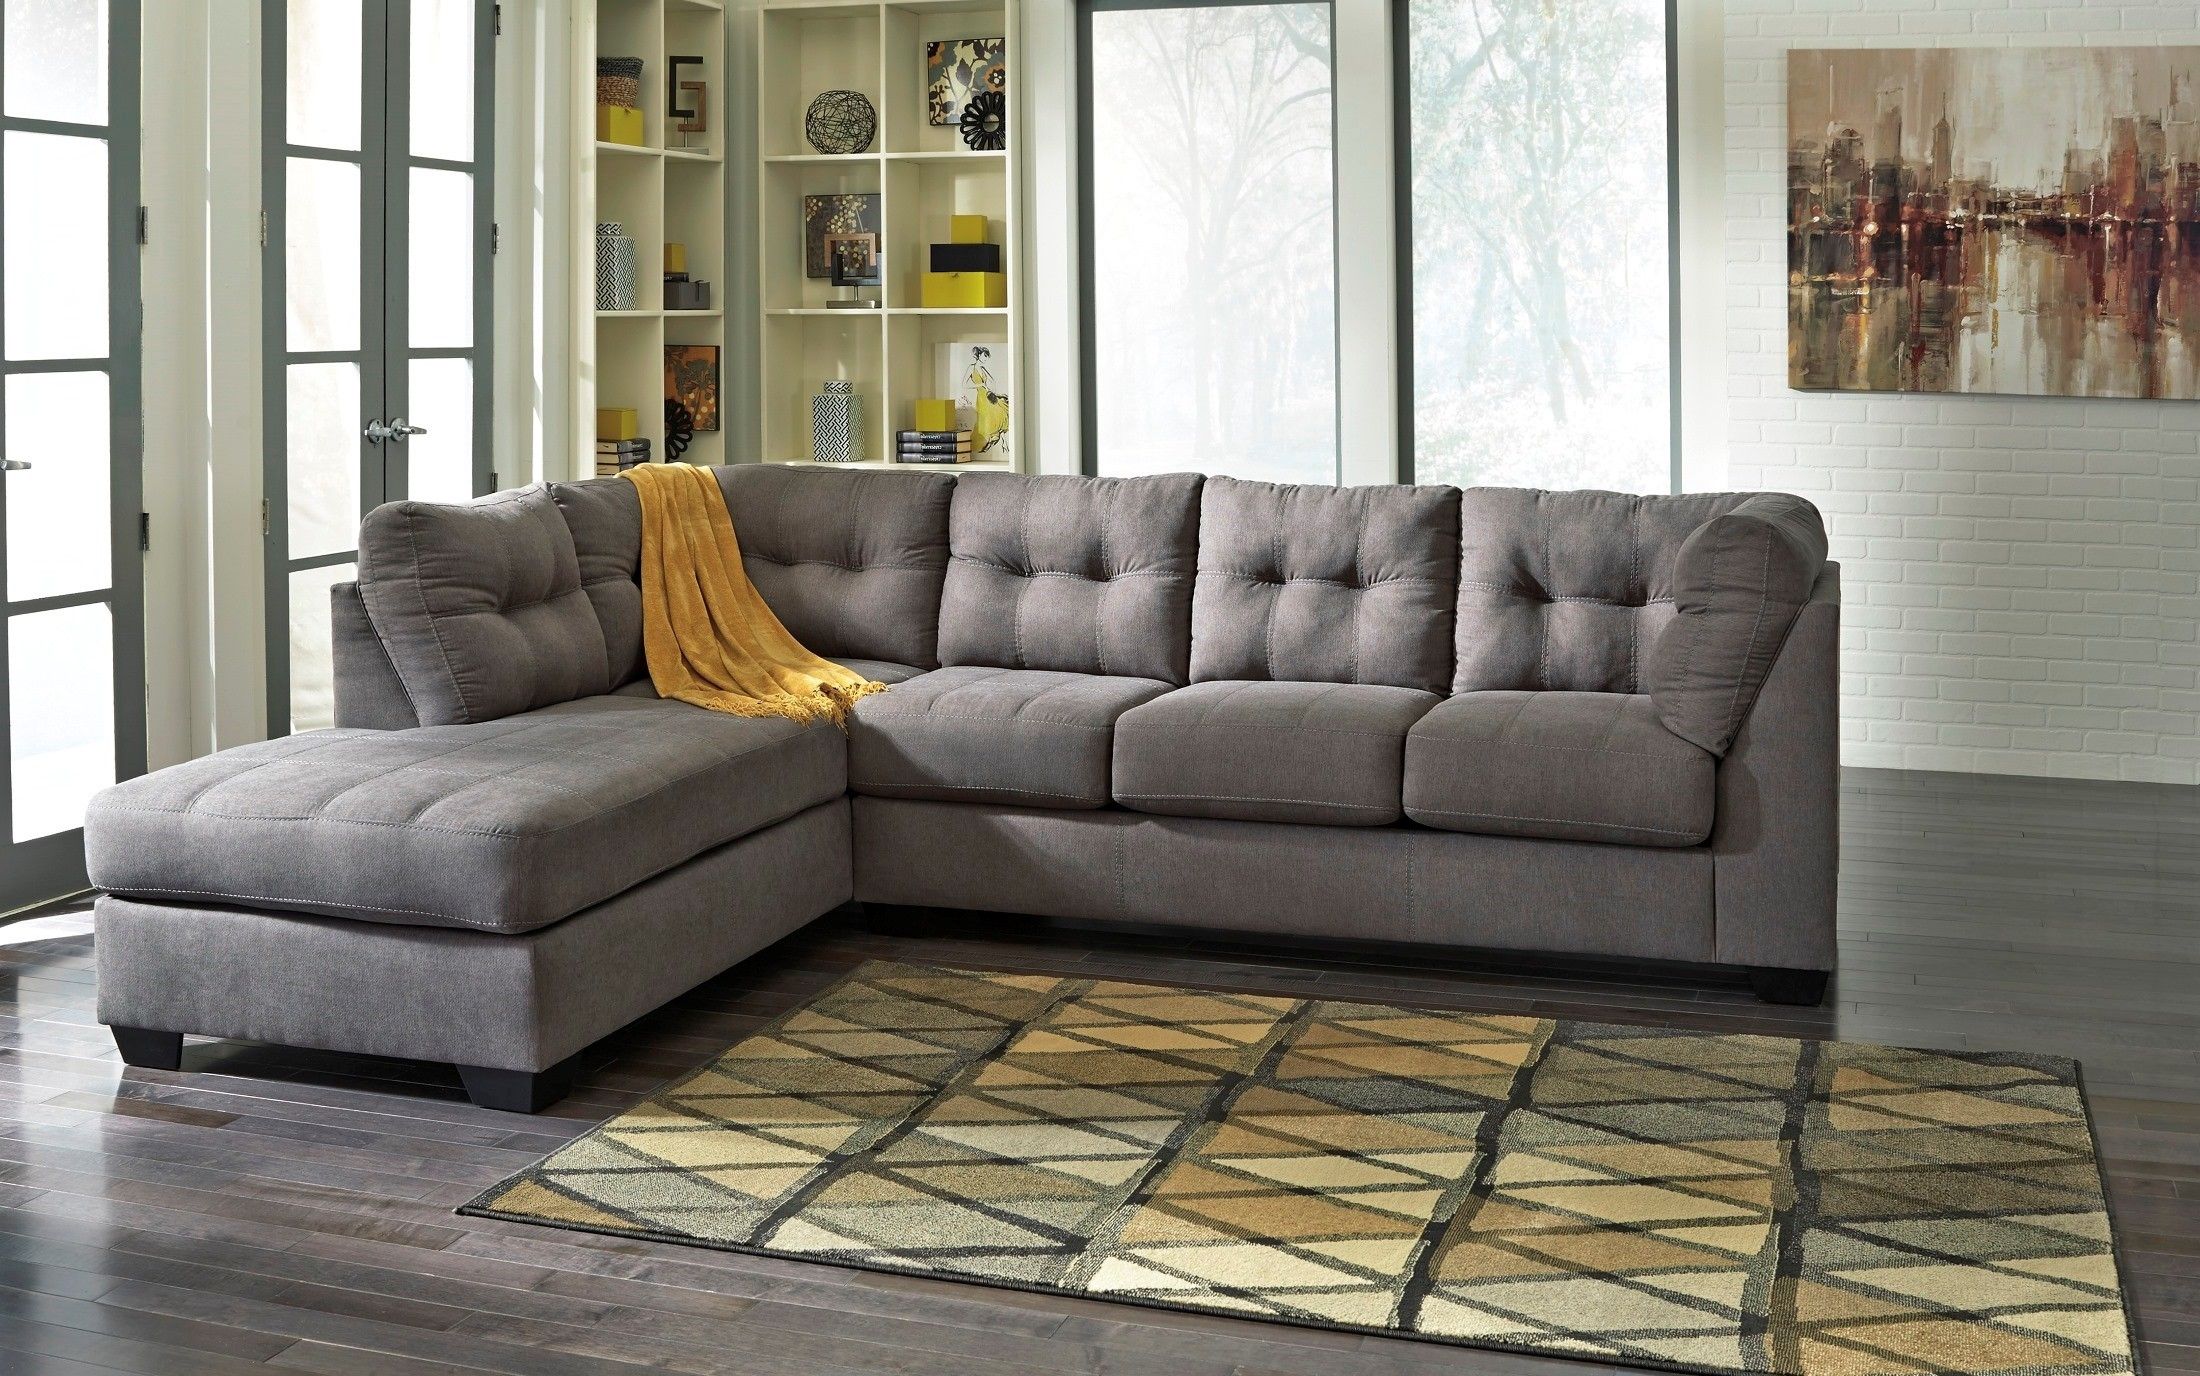 Maier Charcoal Laf Sectional From Ashley 45200 16 67 Coleman Intended For Ashley Furniture Gray Sofa (View 12 of 15)